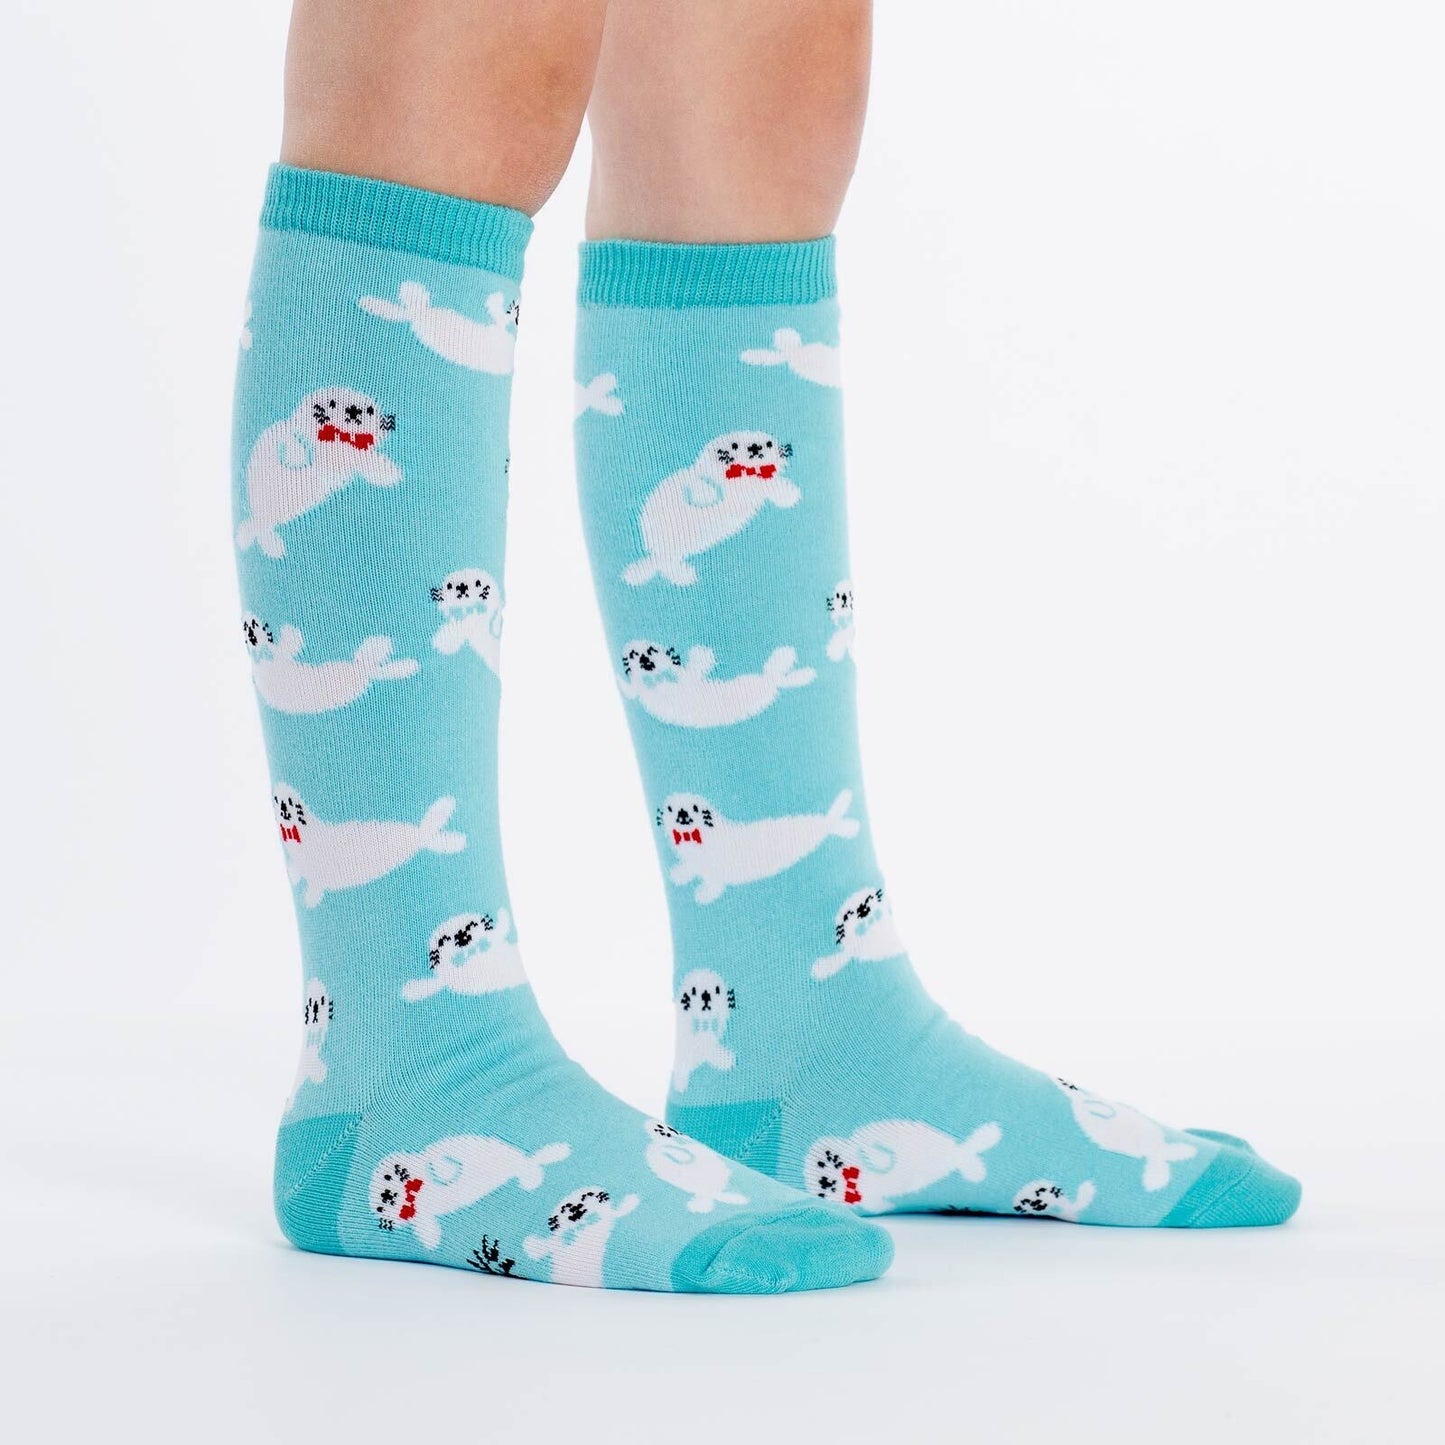 Youth Knee High Sock (ages 3-6) Various Designs